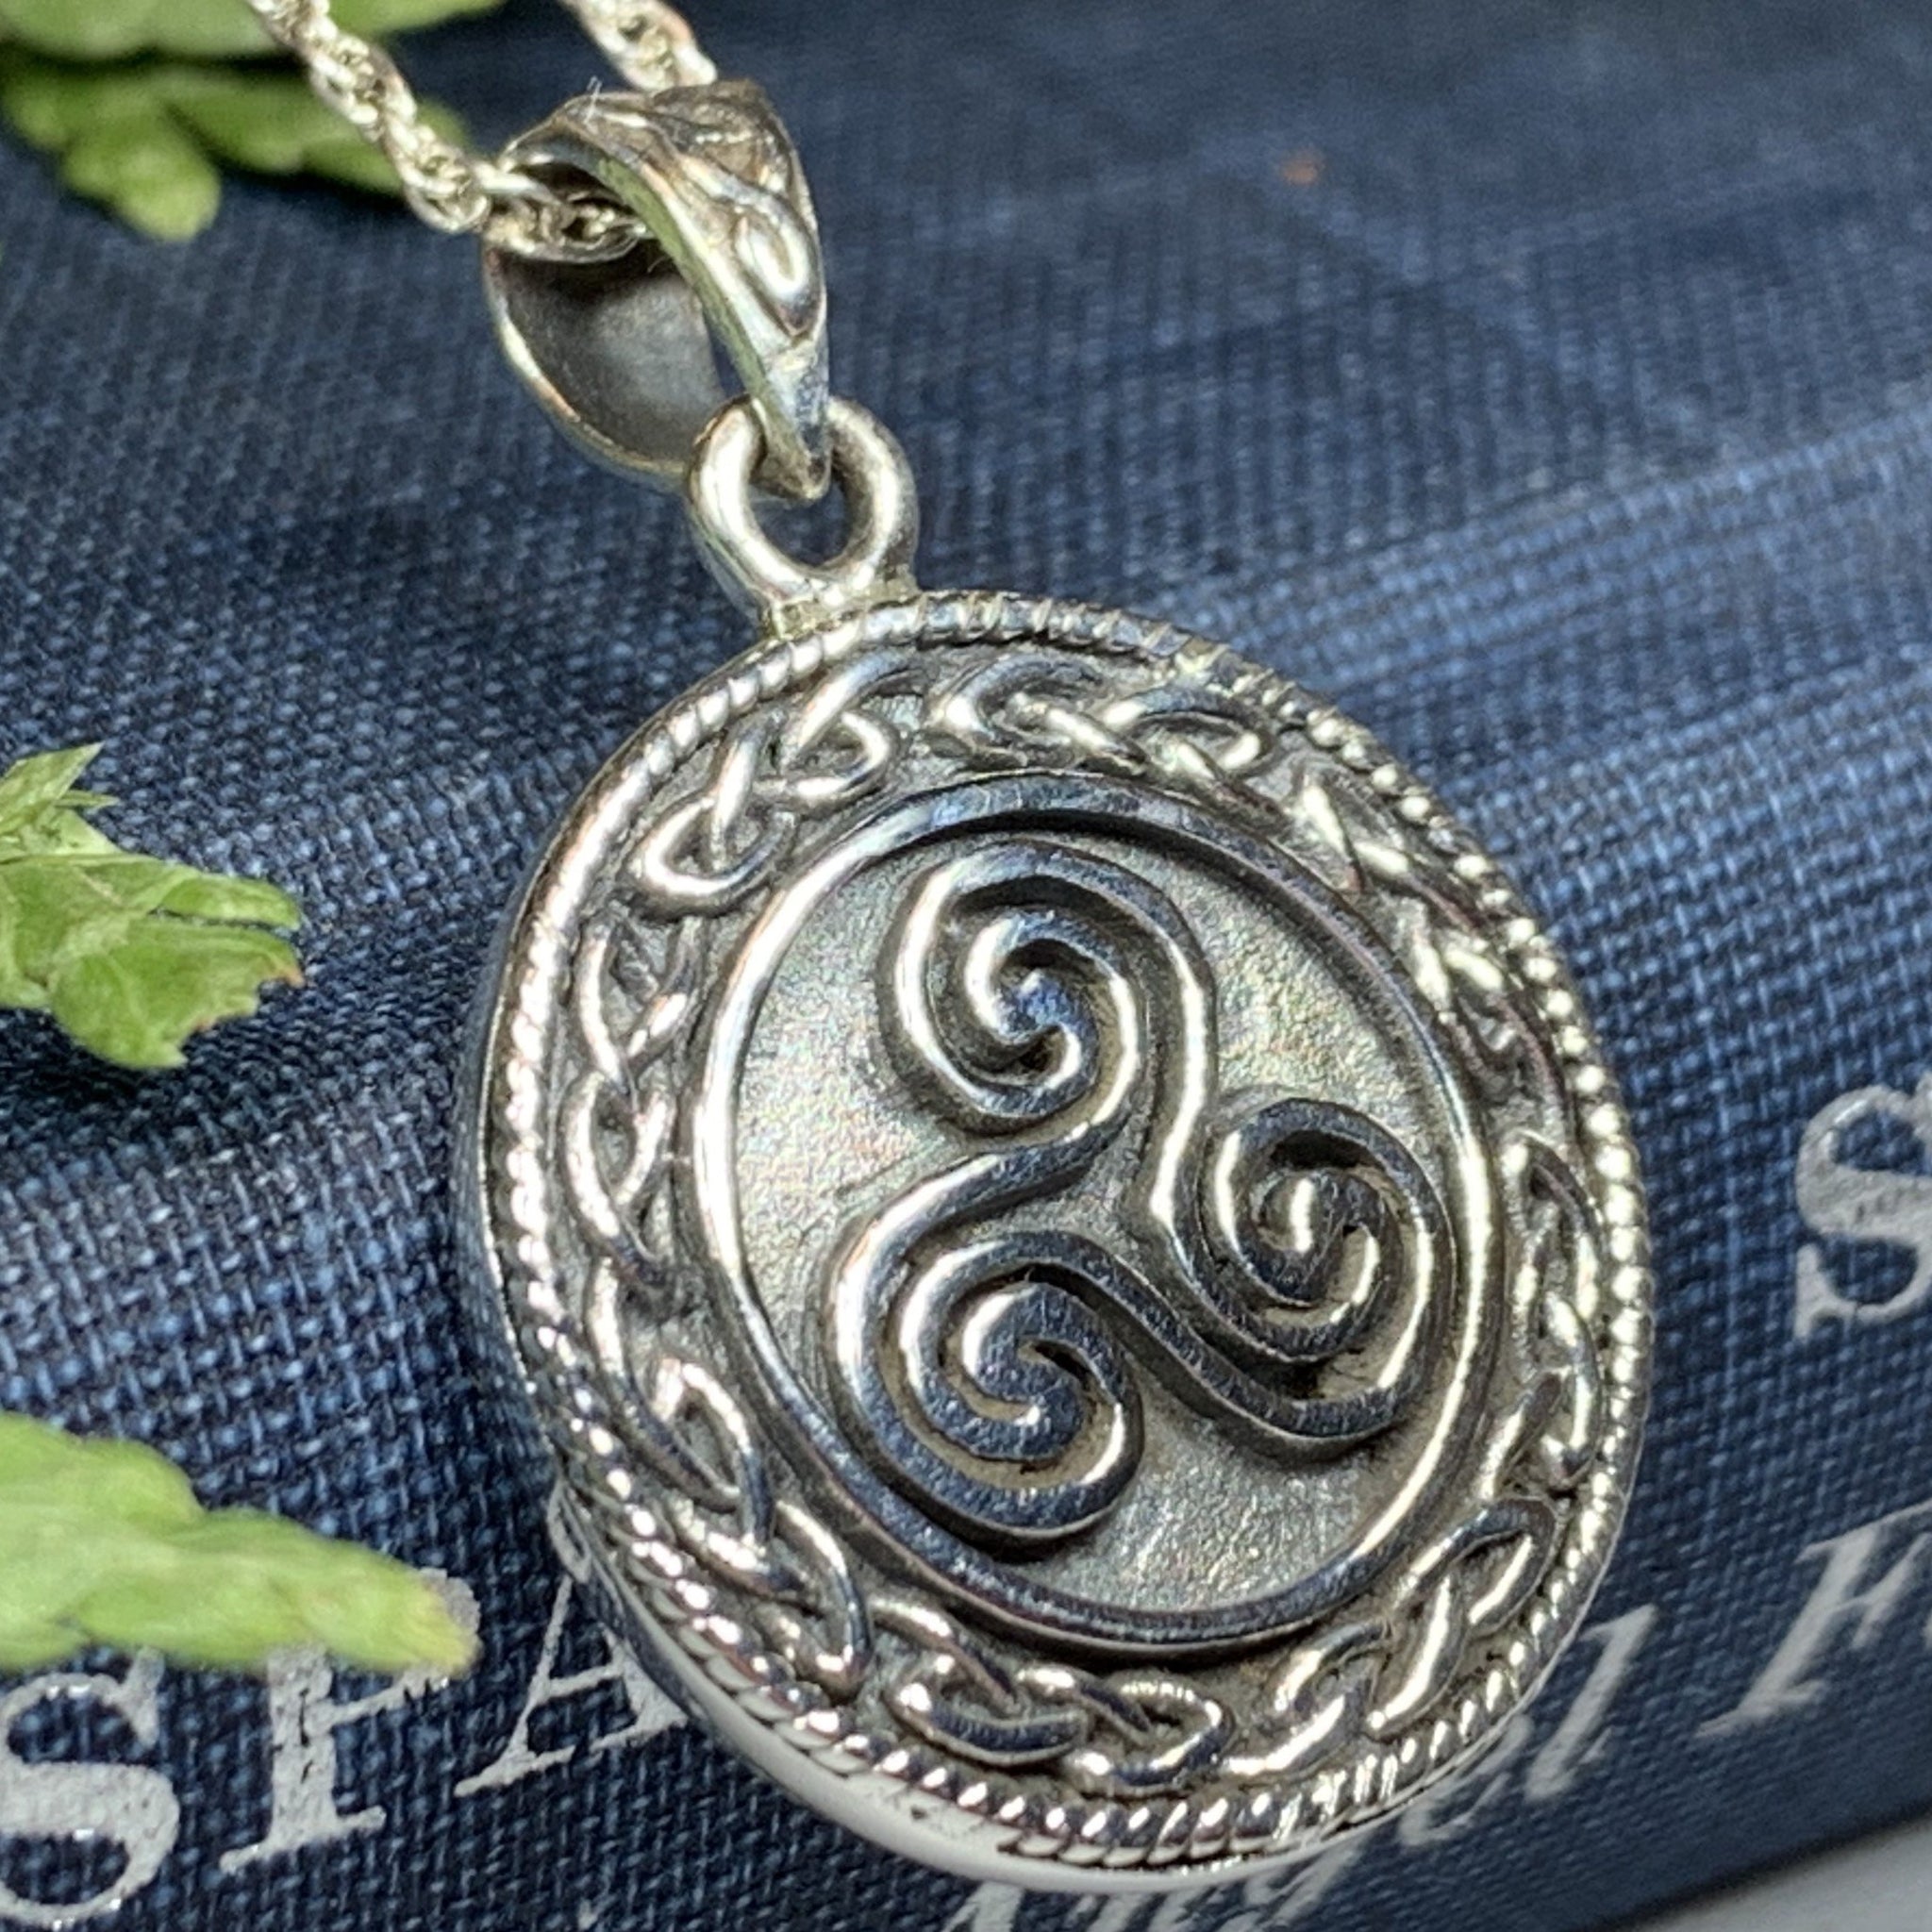 Celtic Spiral Pendant Spiral Symbol Necklace Jewelry New Beginning  Prosperity Growth Energy Eternity Hand-carved by Myself From Stone 